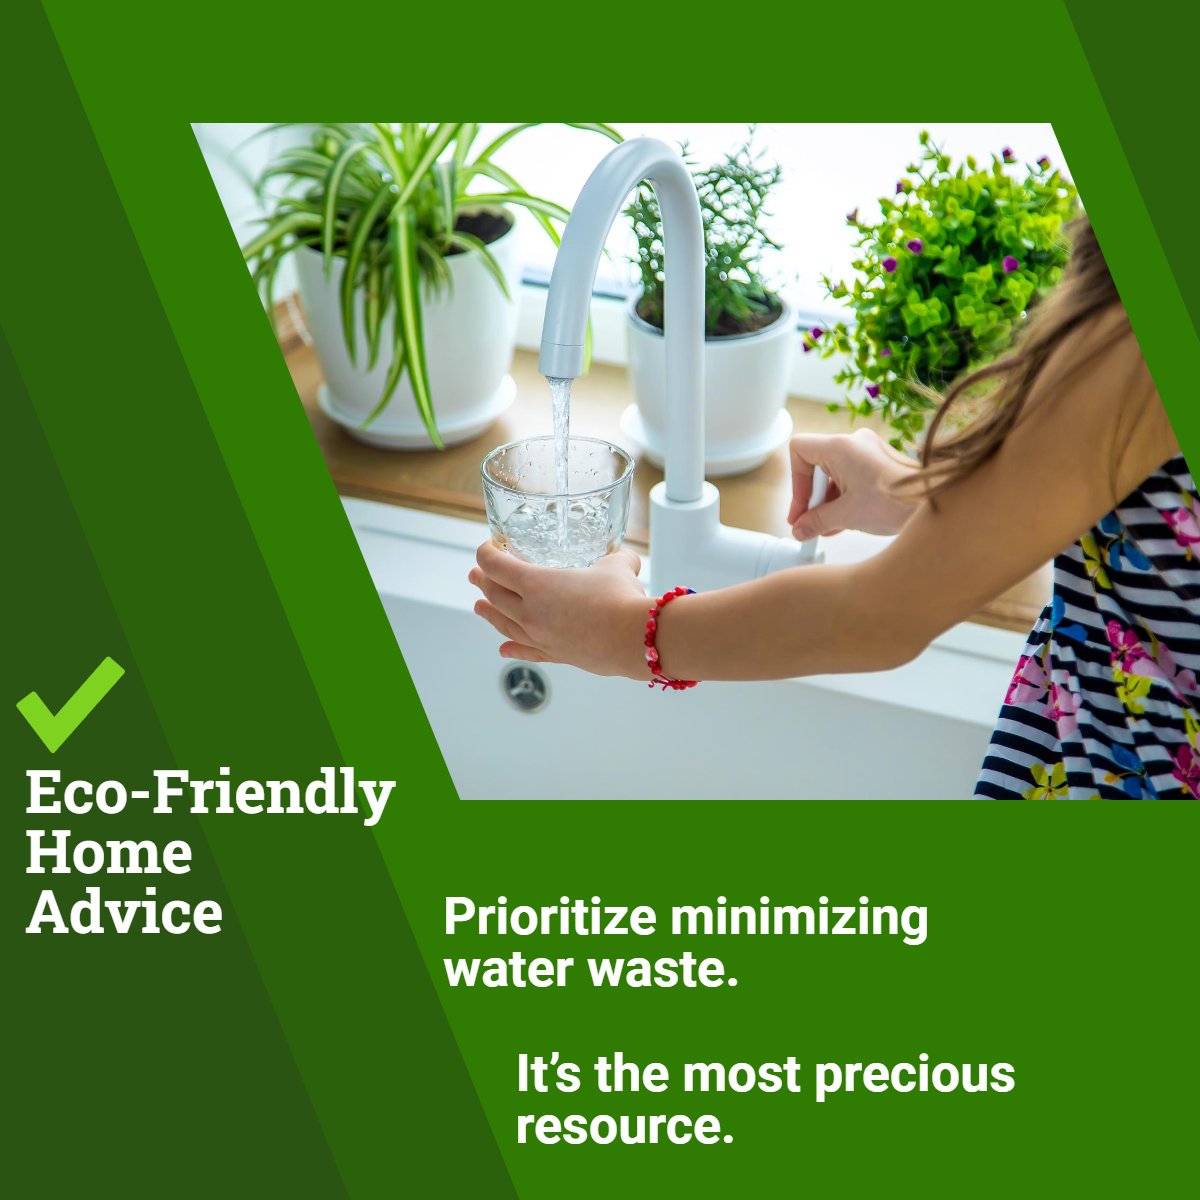 Do you want to reduce your ecological footprint?

Share your own eco-friendly tips 🏡💪 

#EcoFriendlyHome #GreenLiving #SustainableLiving